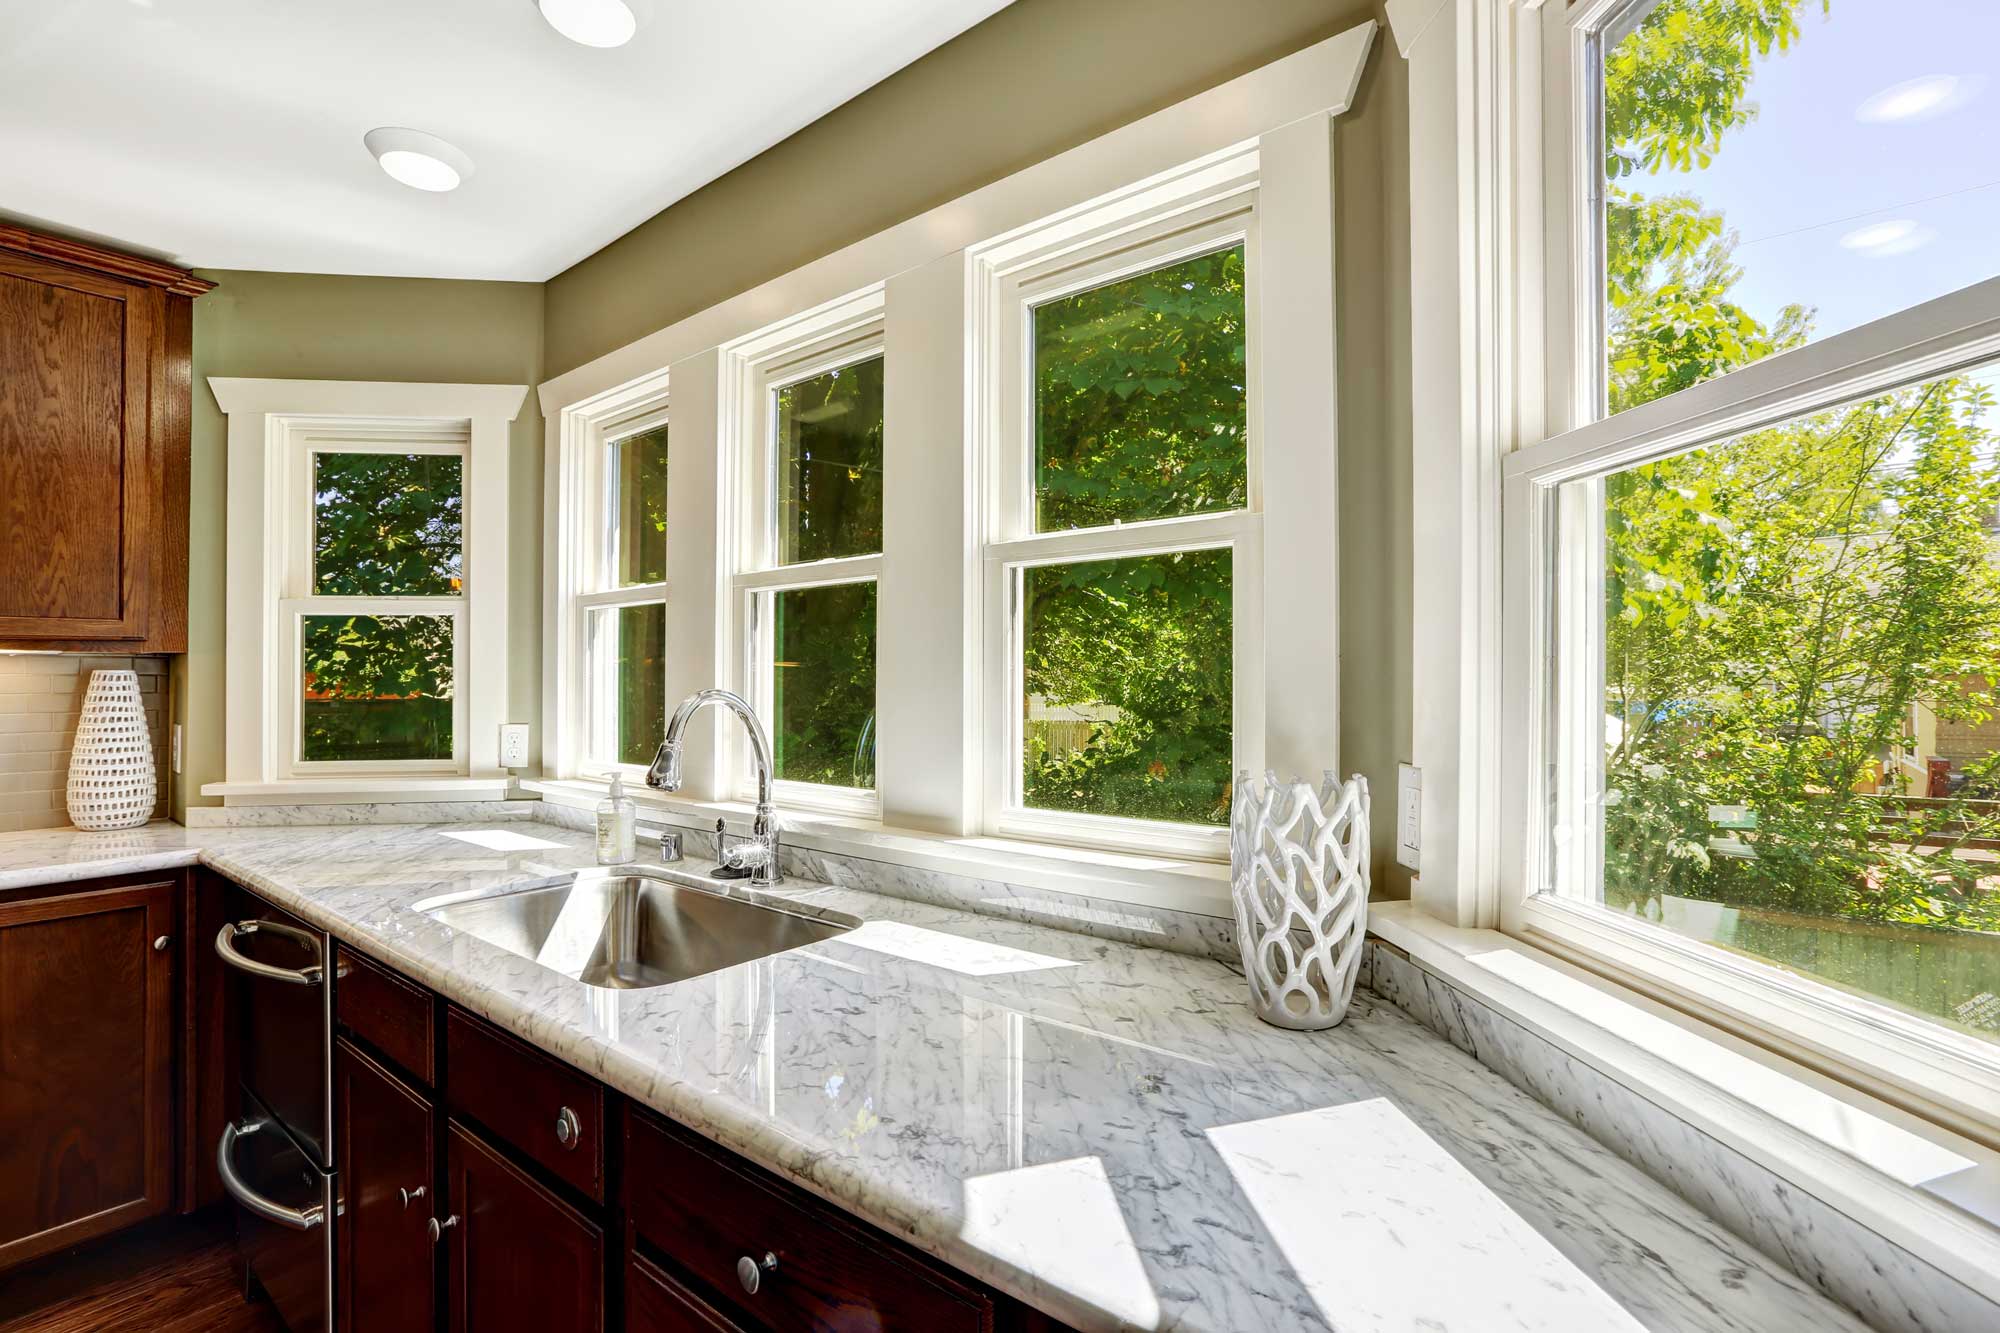 Kitchen countertops under bay windows with view of summer foliage